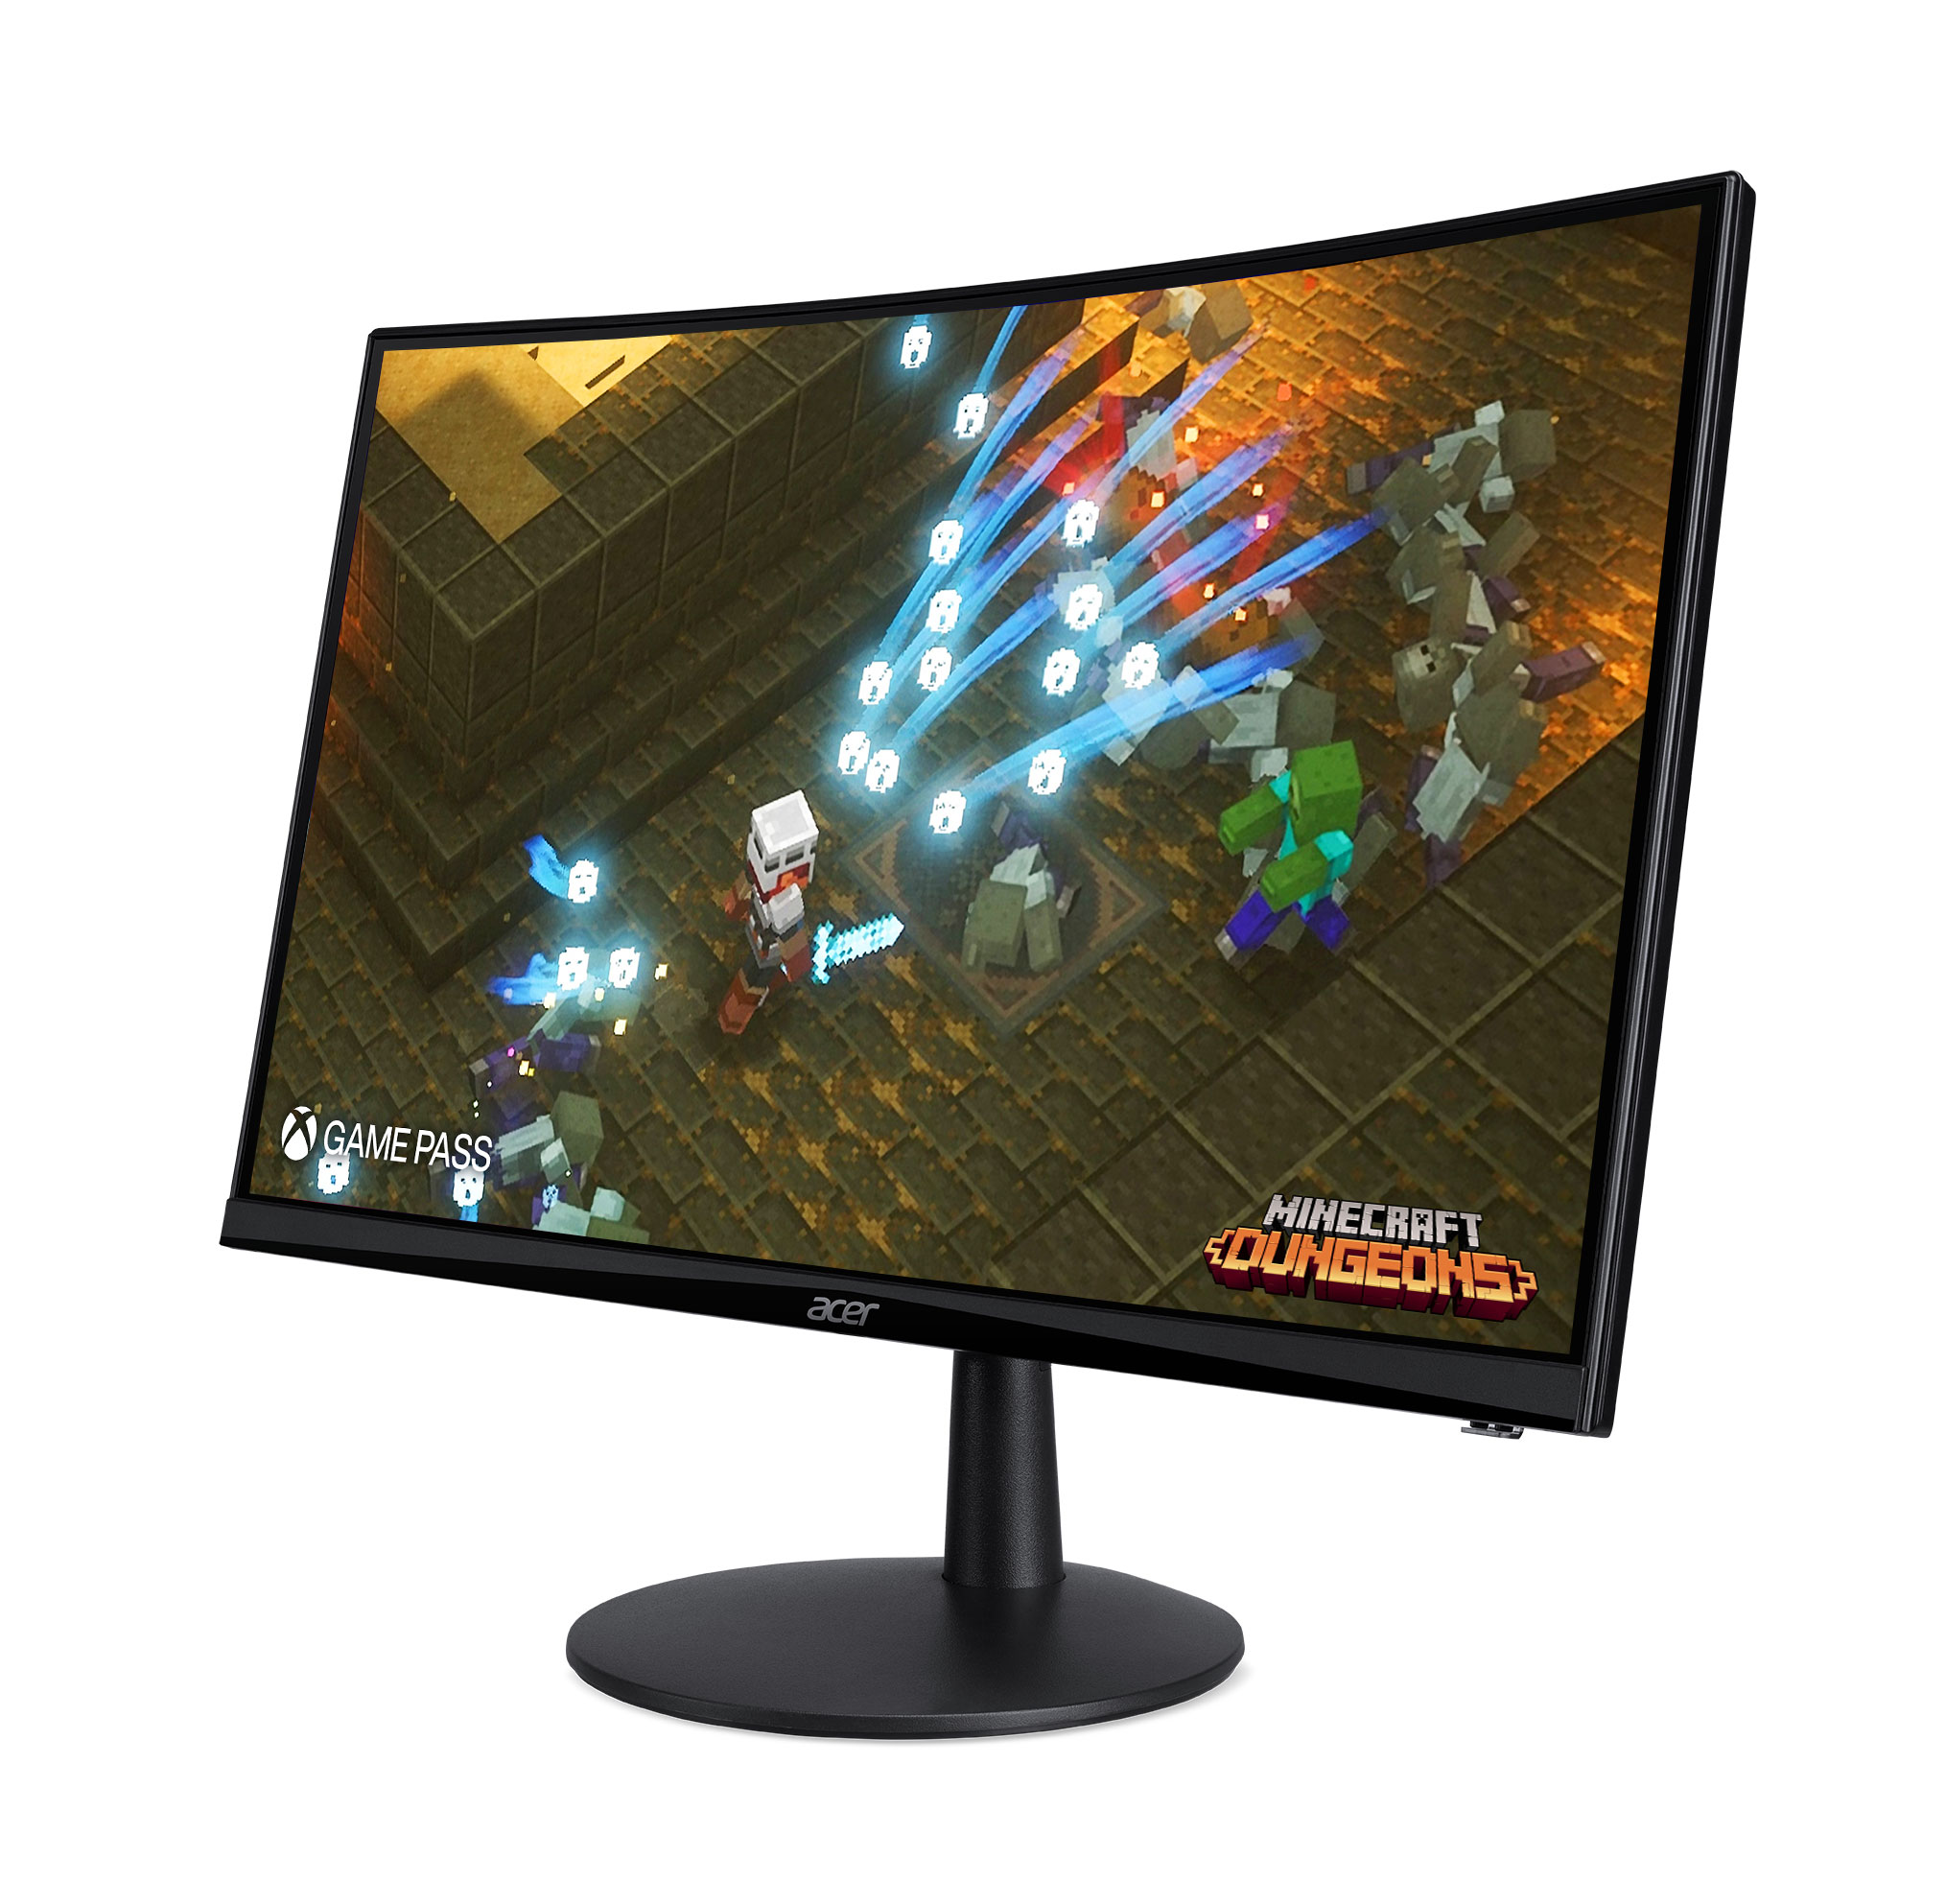 Acer Nitro 23.6" inch Curved Full HD Gaming Monitor (New) - Black (ED240Q Sbiip) - image 3 of 8